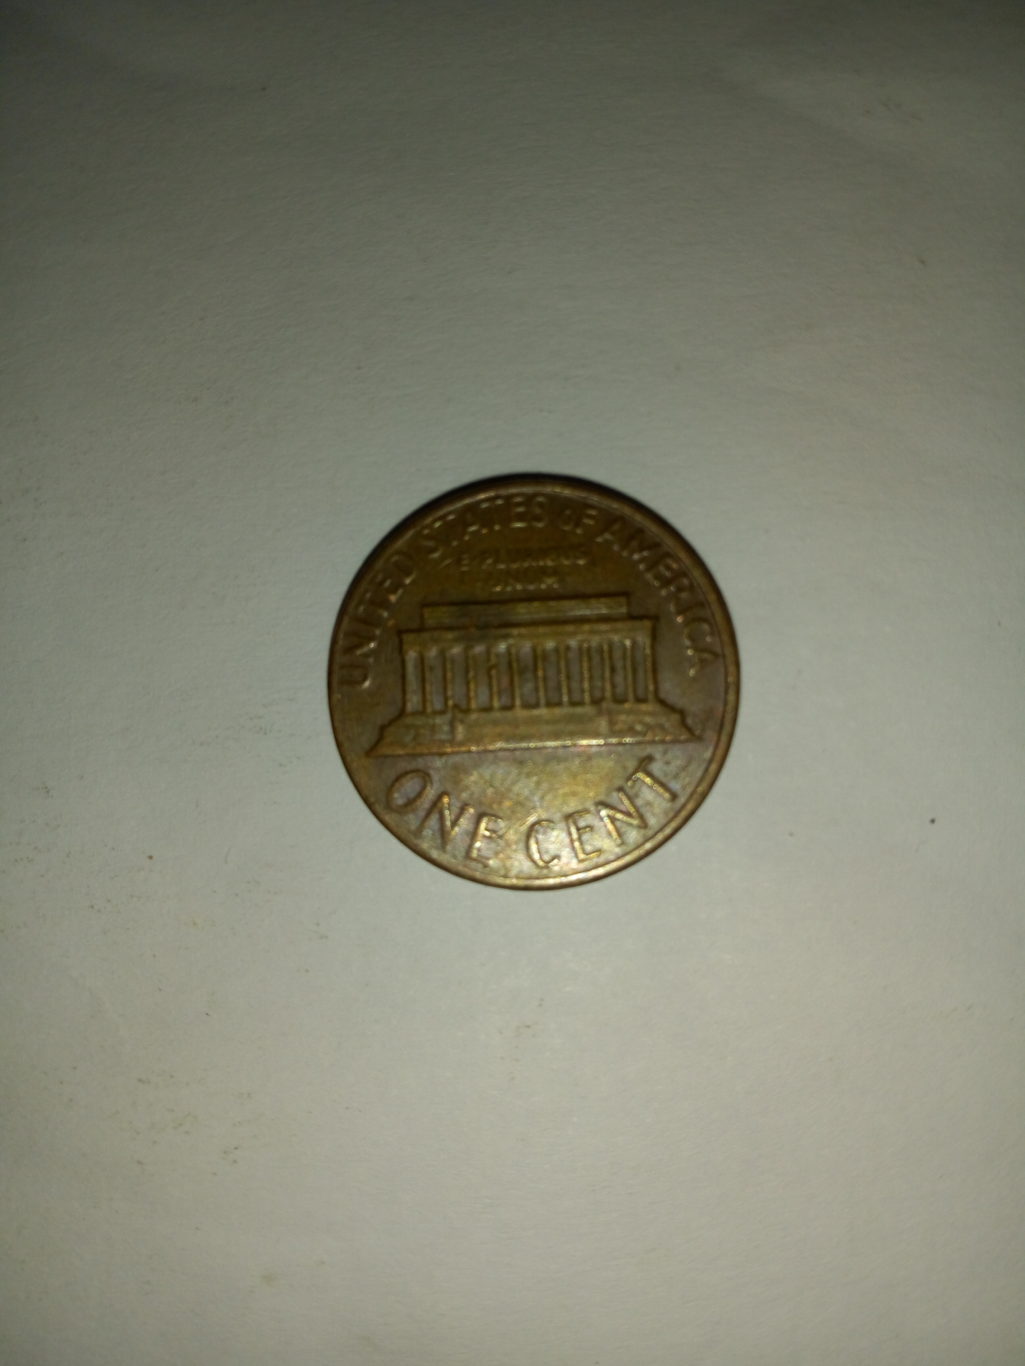 1978_united States of America 1 cent